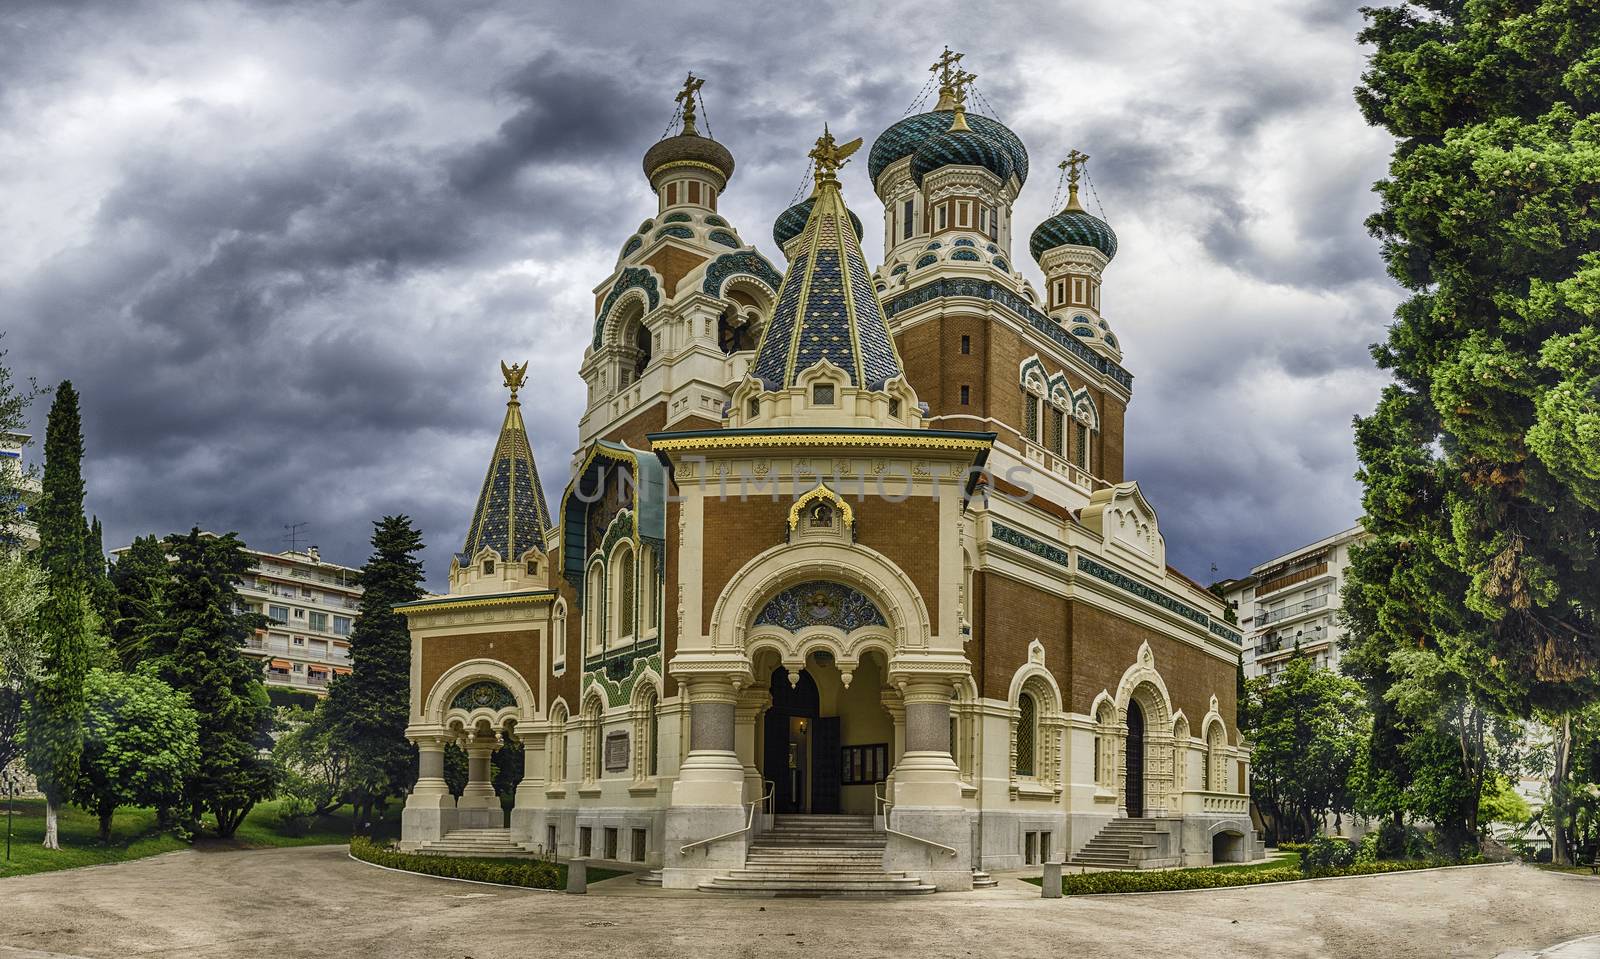 The iconic St Nicholas Orthodox Cathedral, one of the major landmark in Nice, Cote d'Azur, France